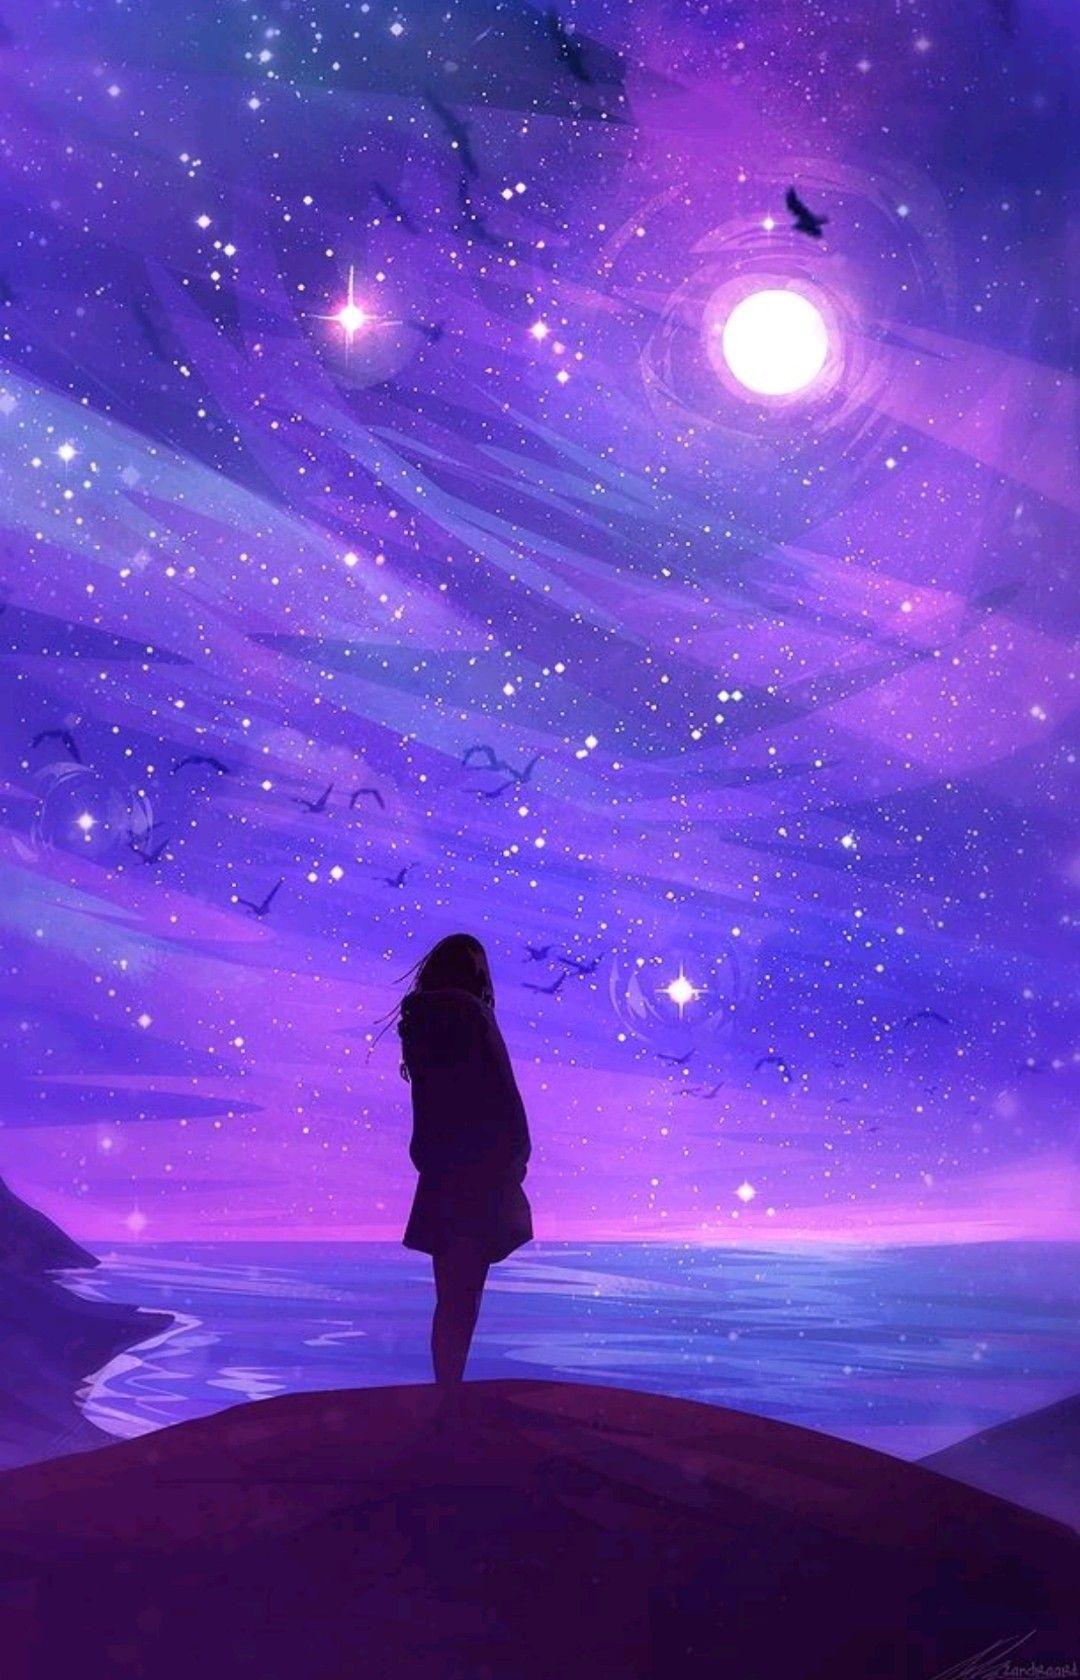 Girl Silhouette. Countless Stars Over the Shore, Shining brightly forevermore. Beautiful Art. Anime scenery, Art wallpaper, Purple aesthetic